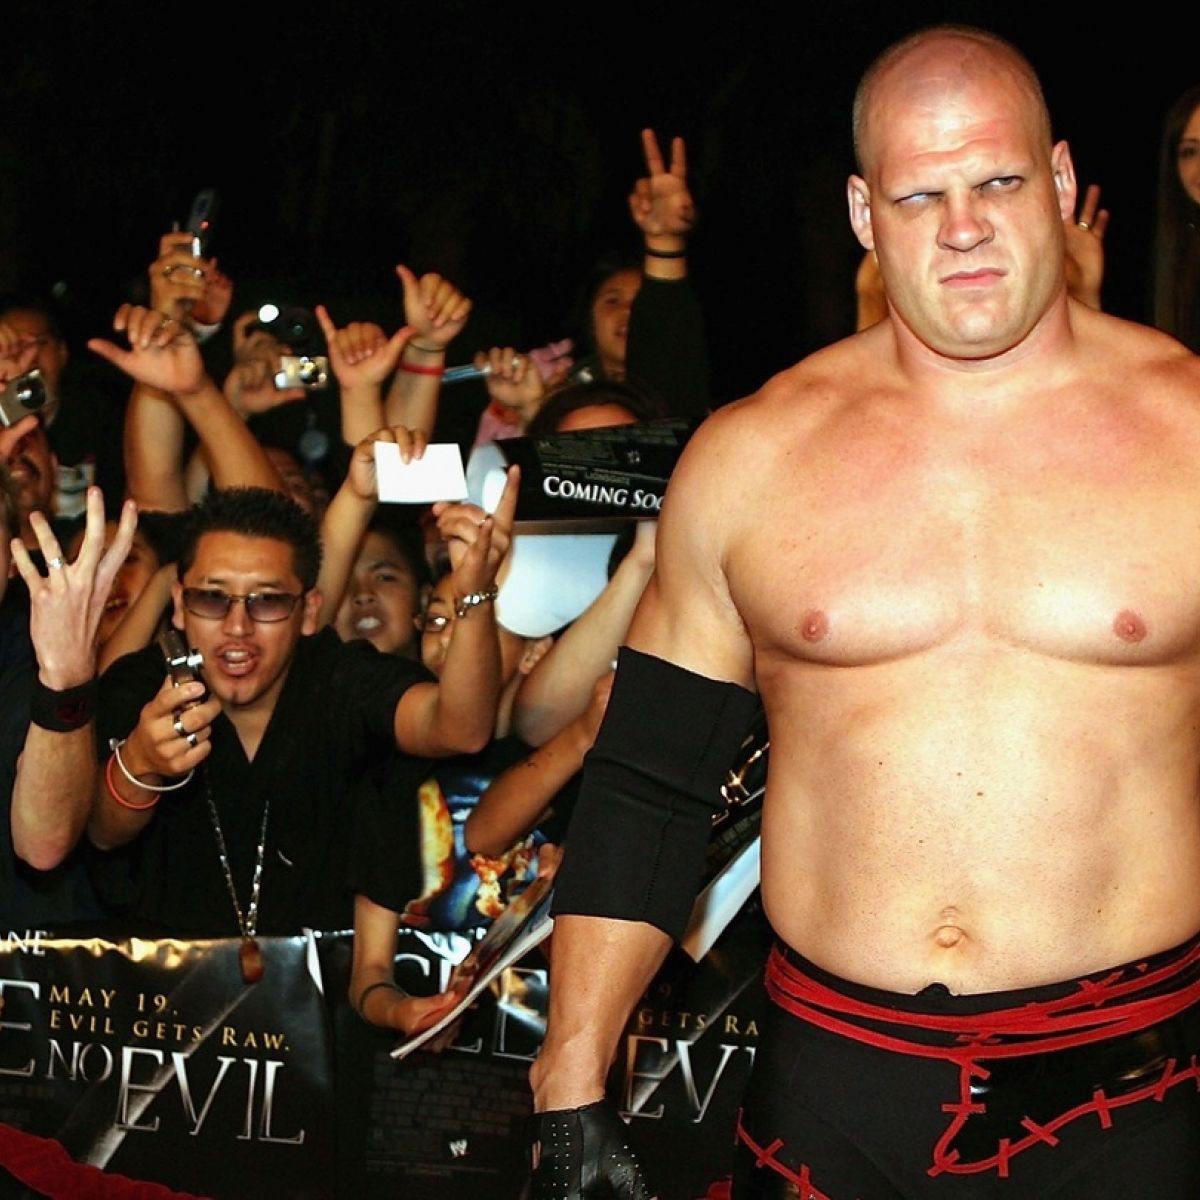 Wwe Wrestler Kane Elected Mayor Of Knox County Tennessee